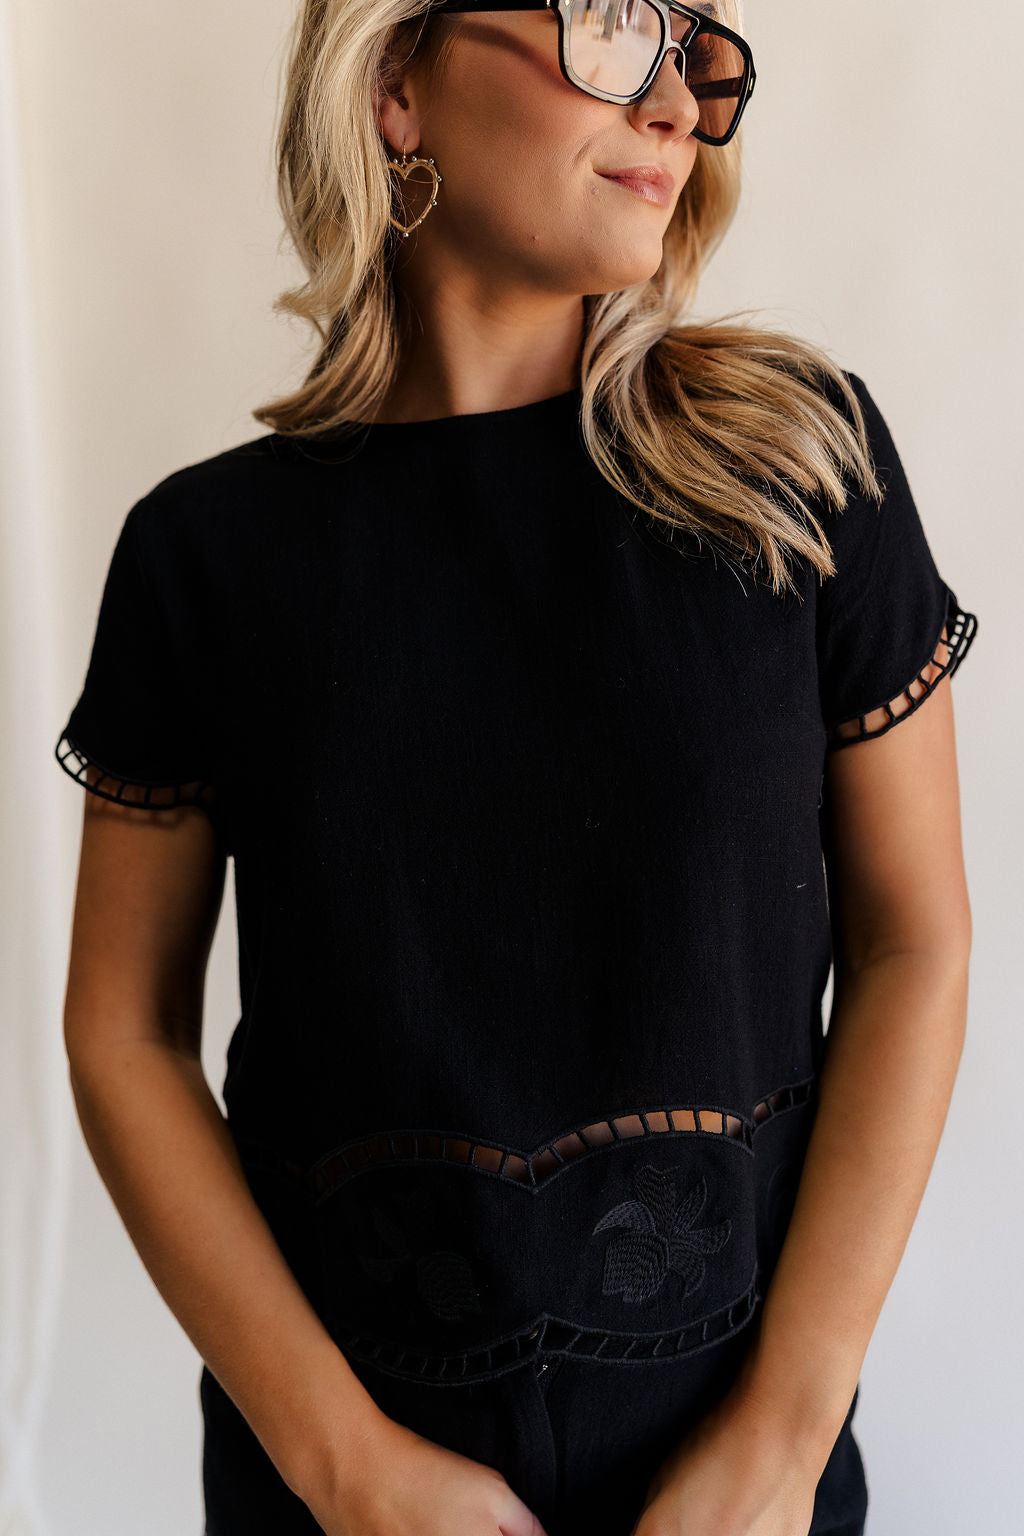 Close up front view of female model wearing the Stella Black Floral Trim Short Sleeve Top which features Black Knit Fabric, Cropped Waist, Scalloped Hem with Open Details, Monochrome Floral Print, Short Sleeves, Round Neckline and Back Button Closure